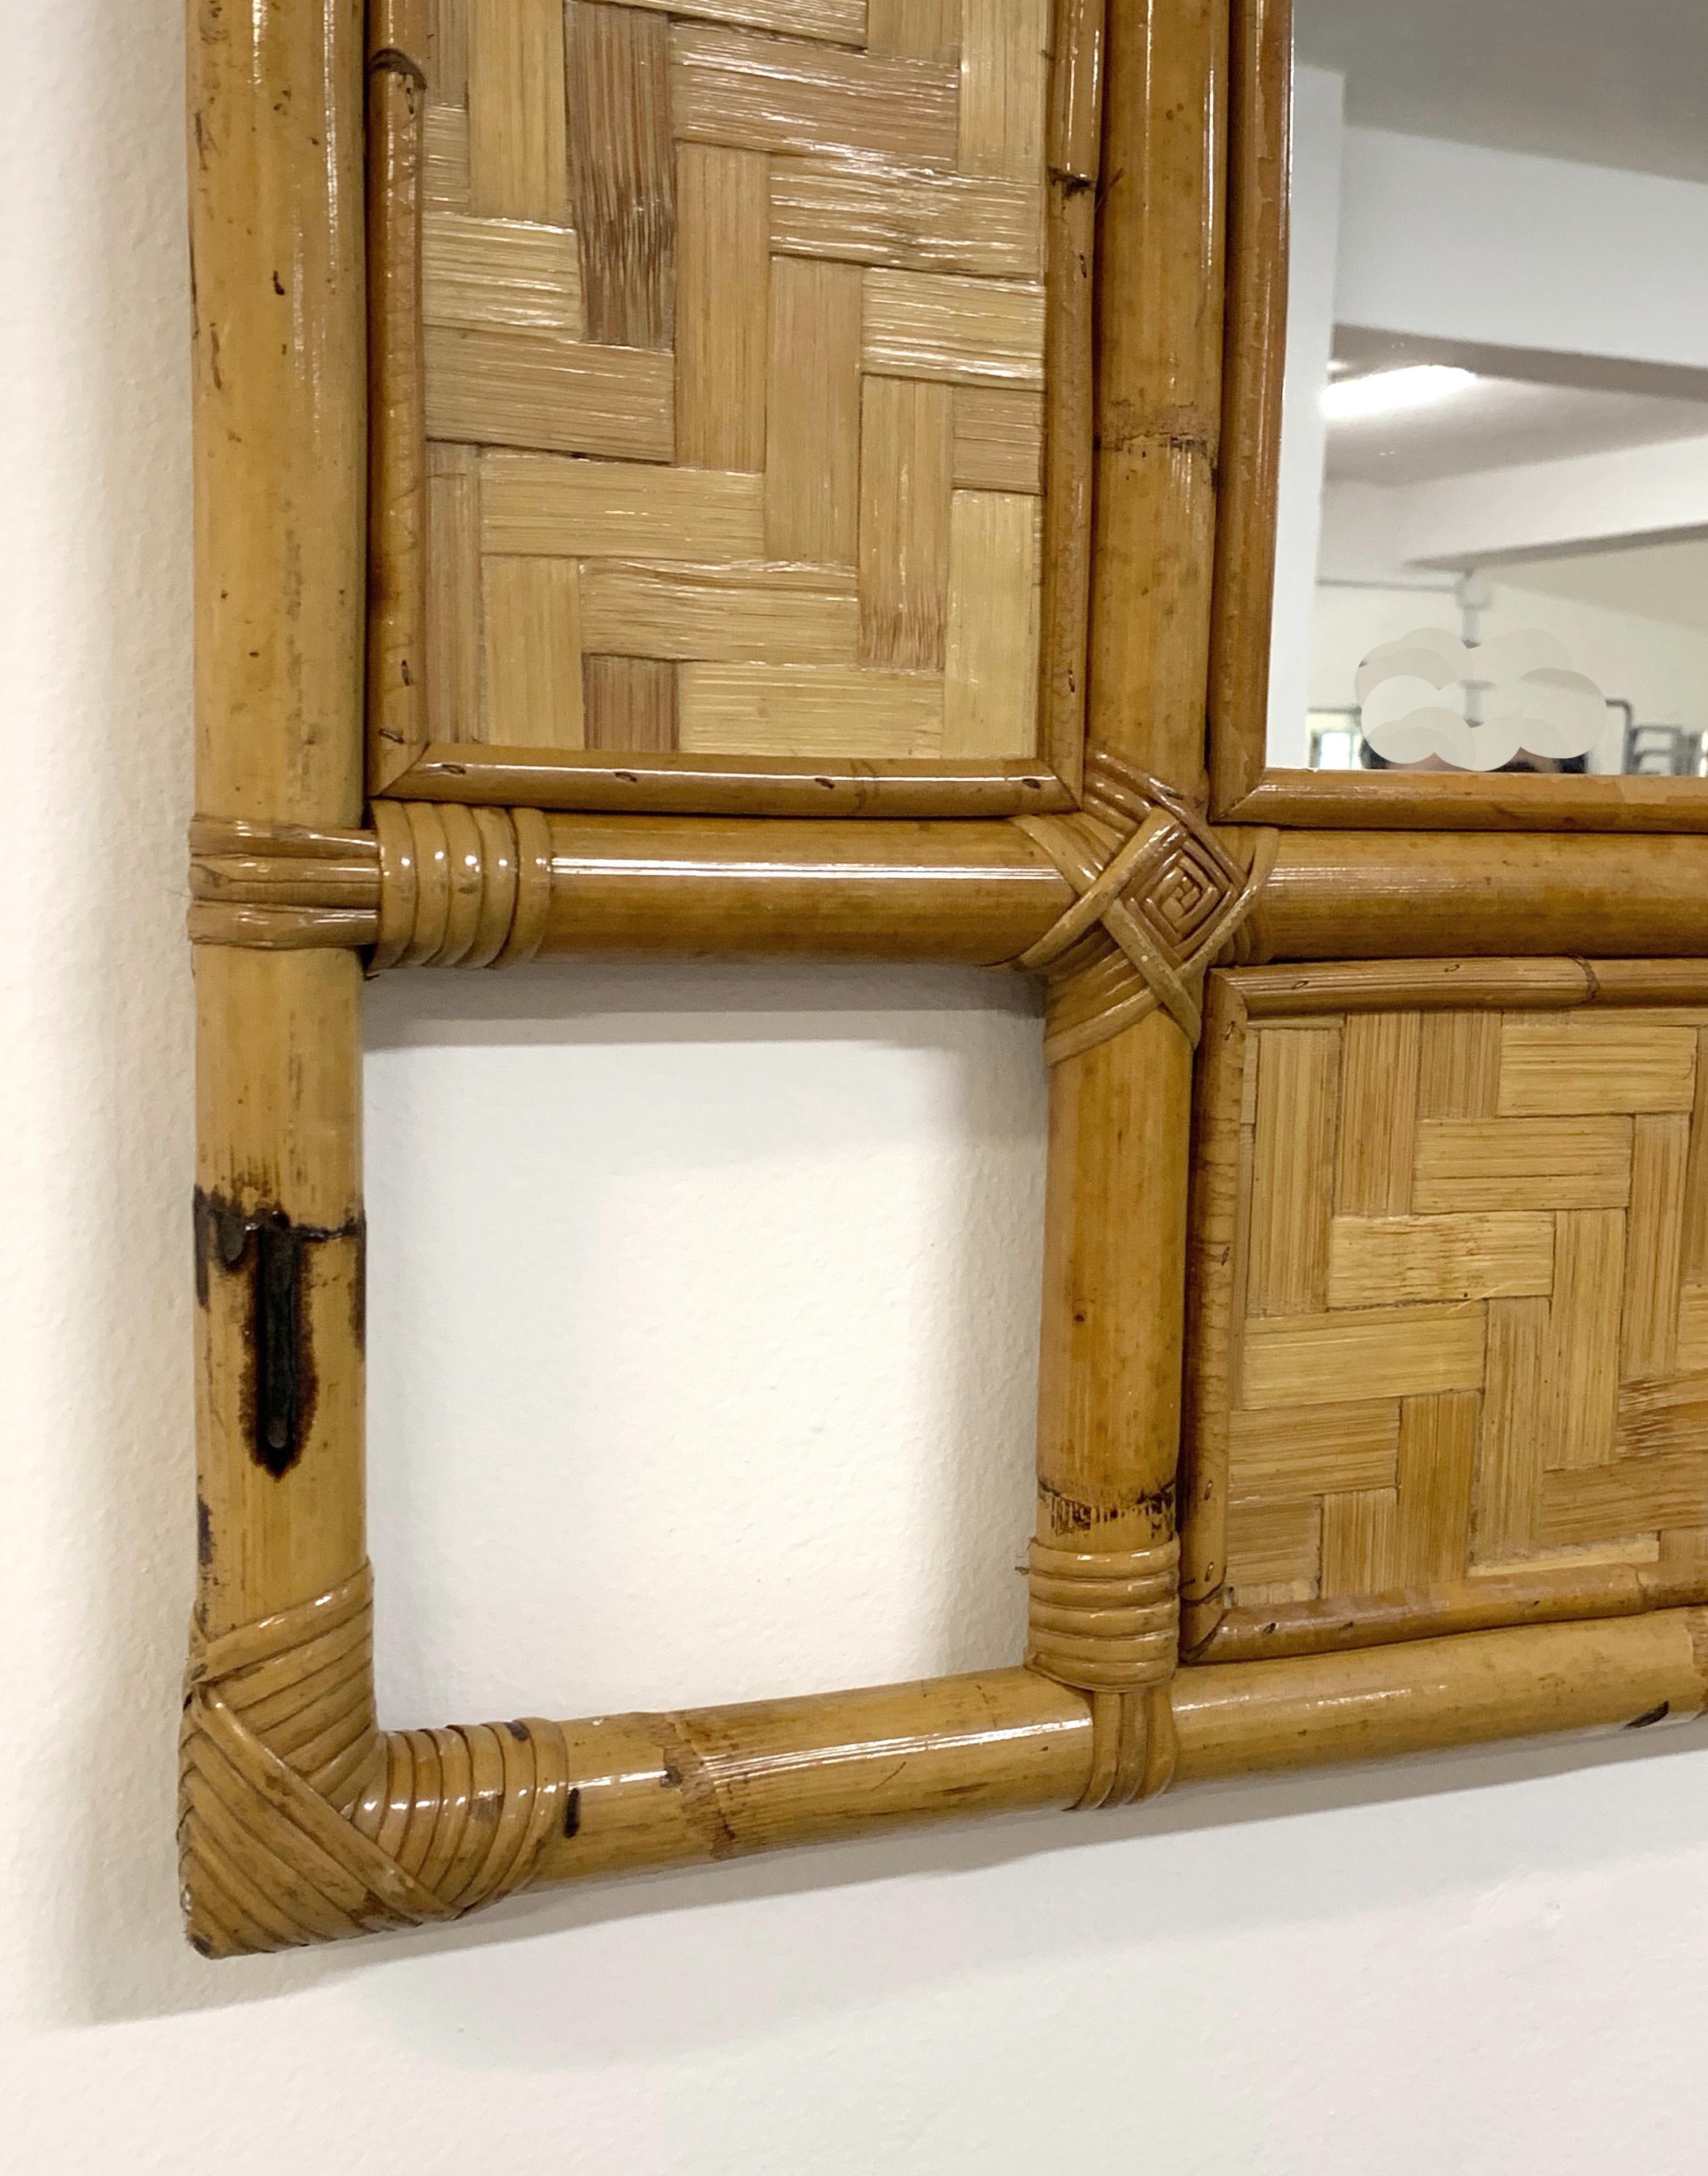 Italian Rectangular Mirror with Bamboo, Rattan and Wicker Structure, 1970s For Sale 4